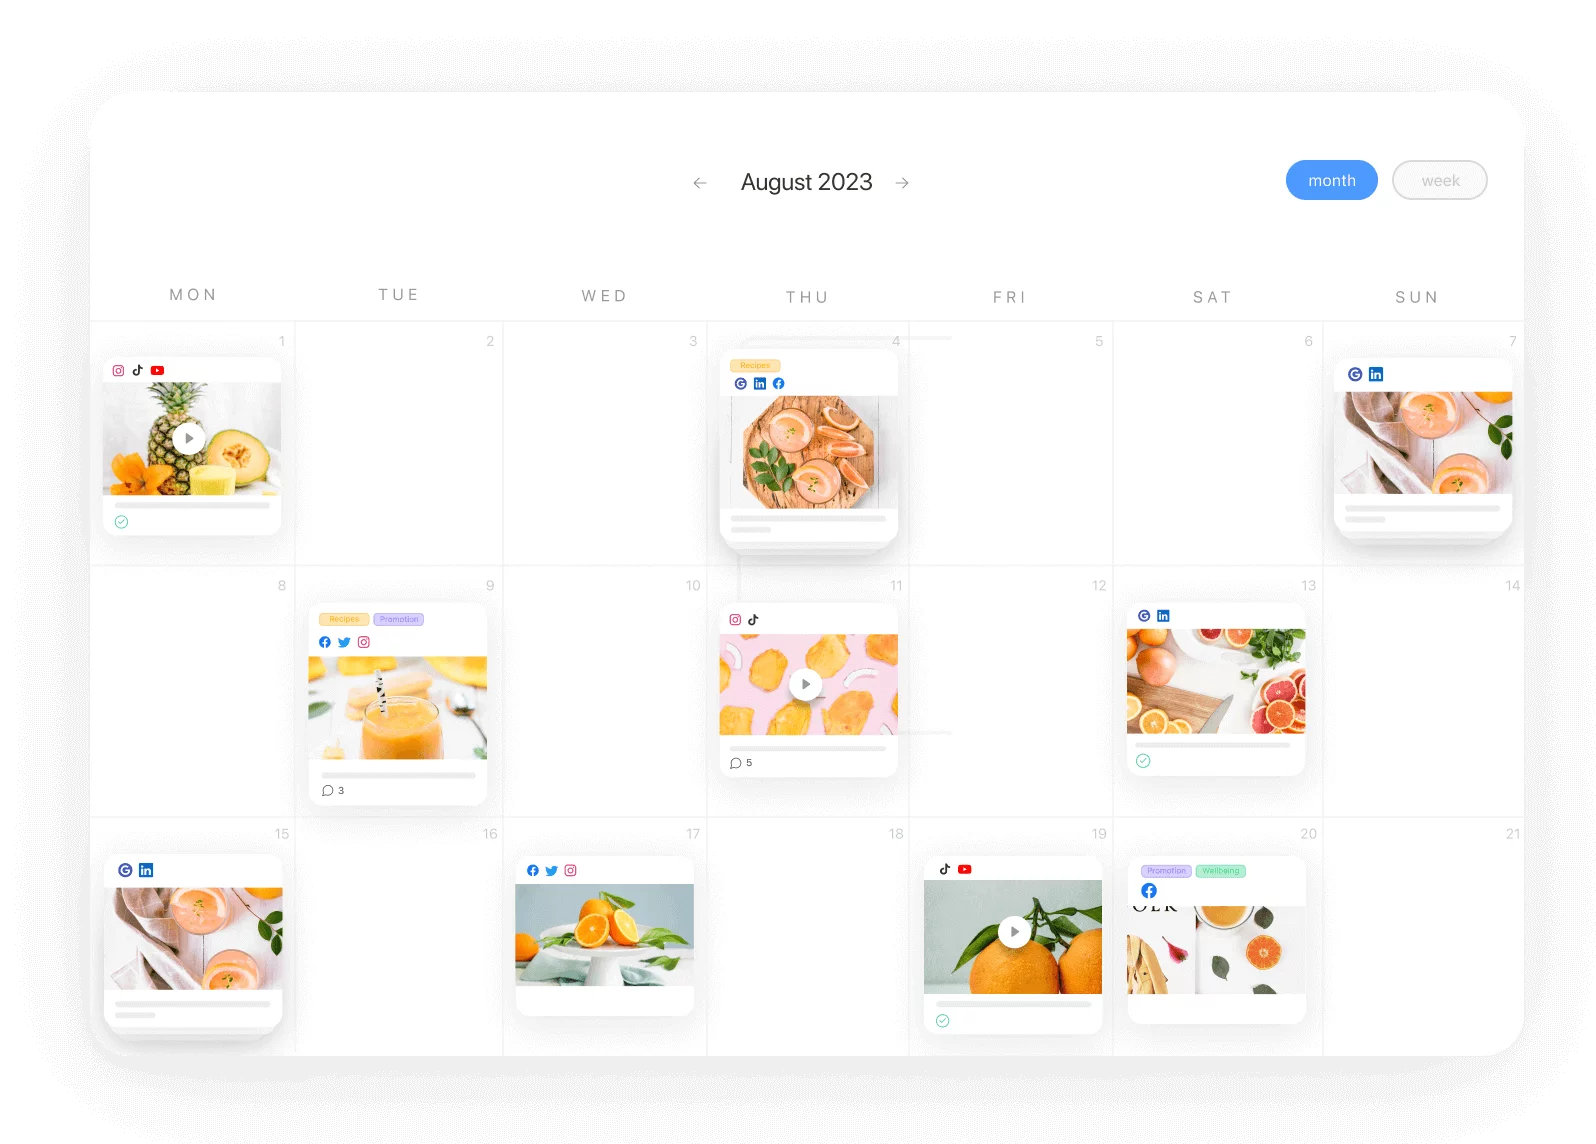 Content calendar in a monthly view